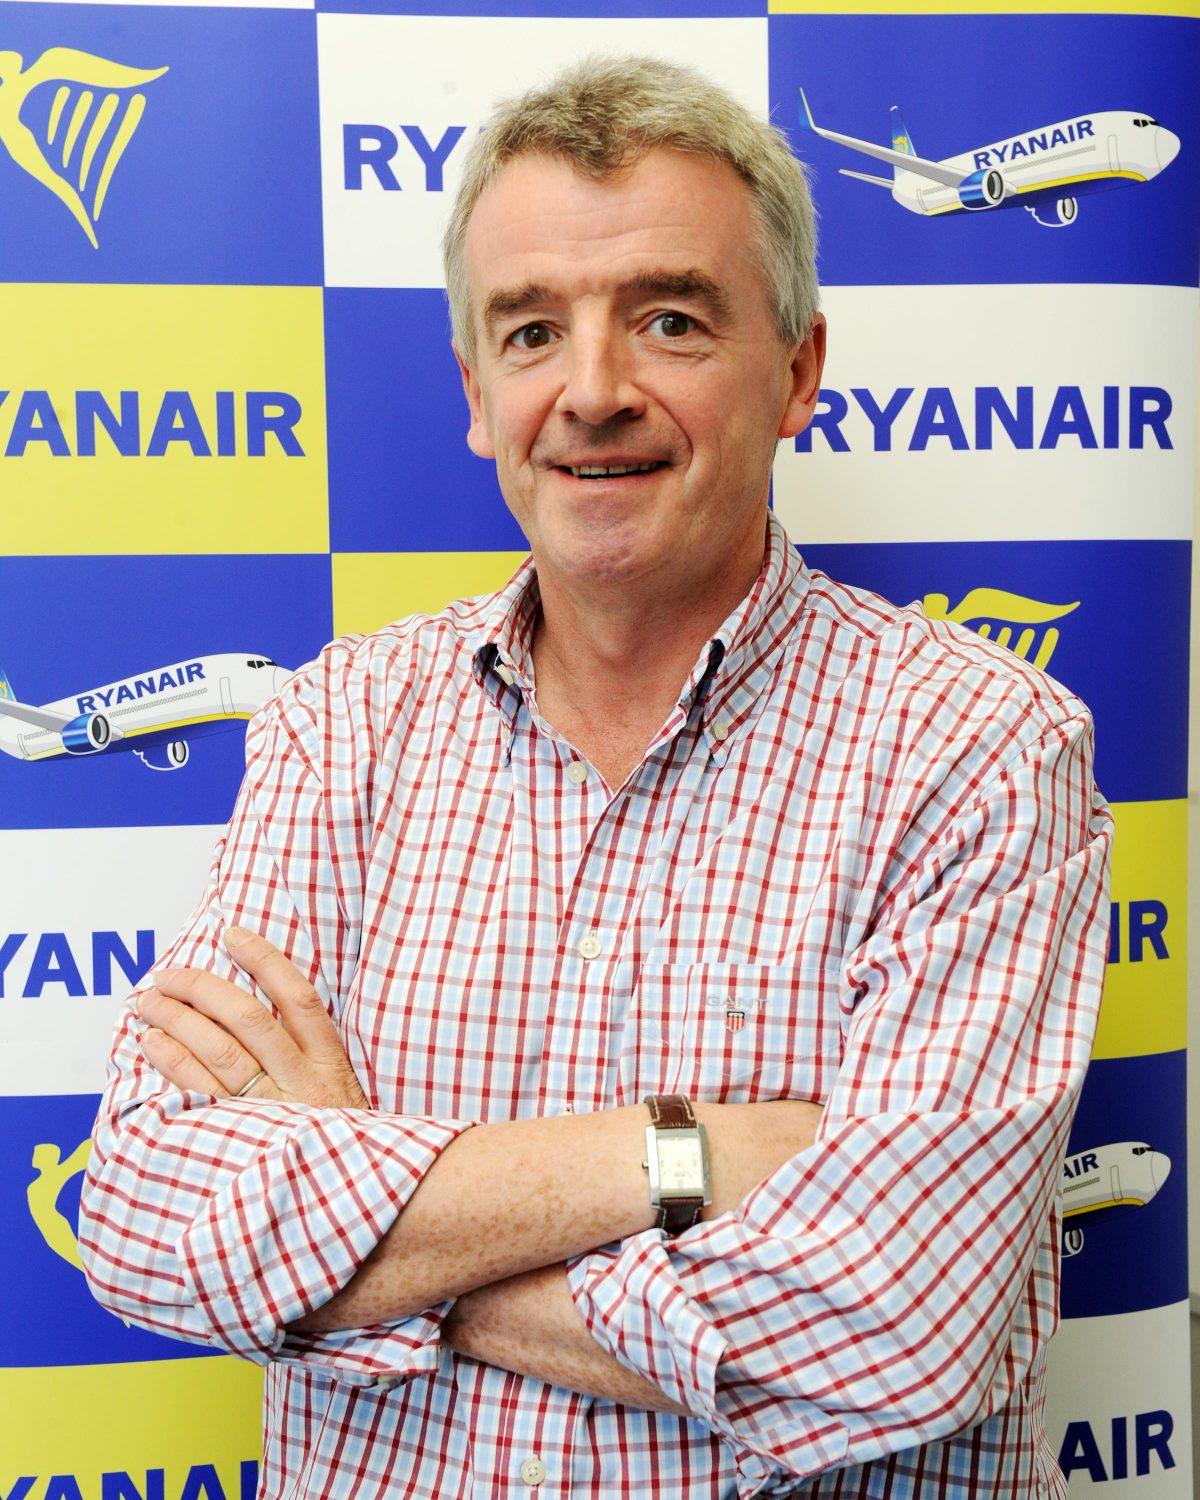 Ryanair Group CEO Michael O’Leary will not rule-out further base closures. (Courtesy Ryanair)